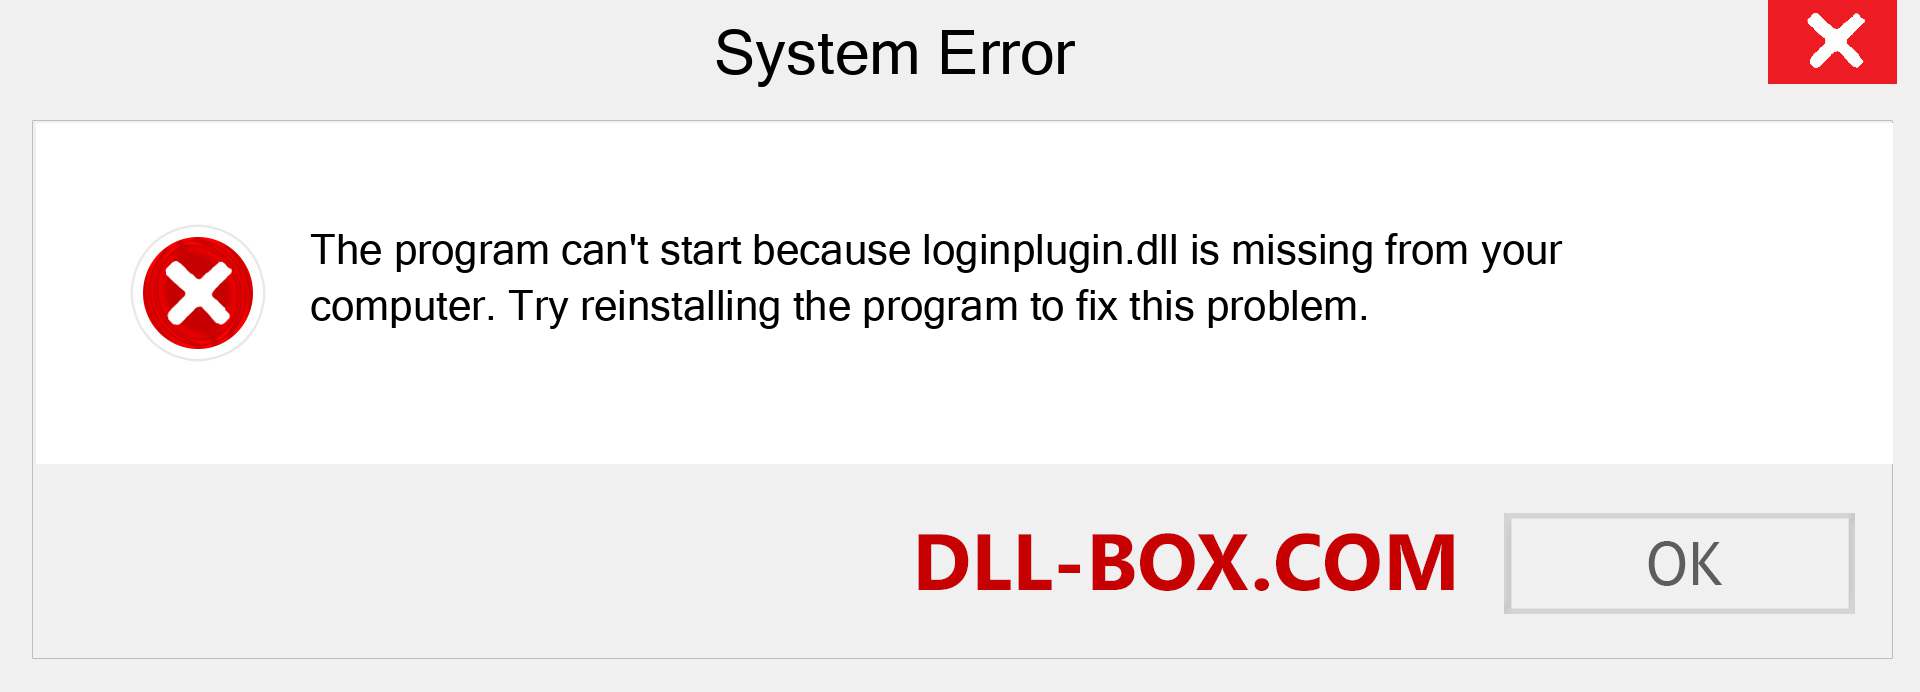  loginplugin.dll file is missing?. Download for Windows 7, 8, 10 - Fix  loginplugin dll Missing Error on Windows, photos, images